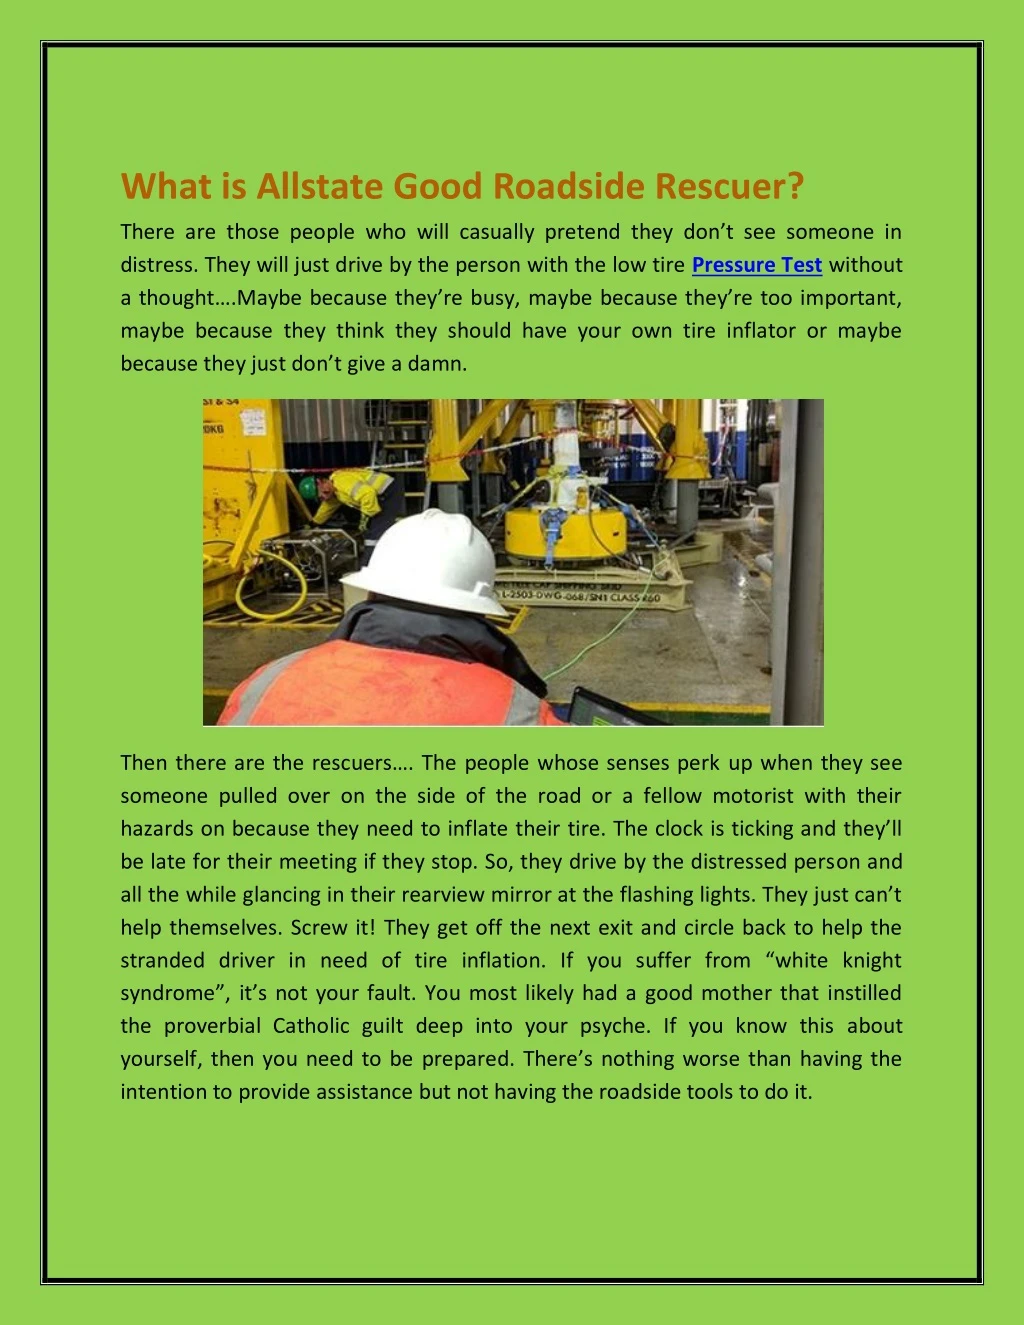 what is allstate good roadside rescuer